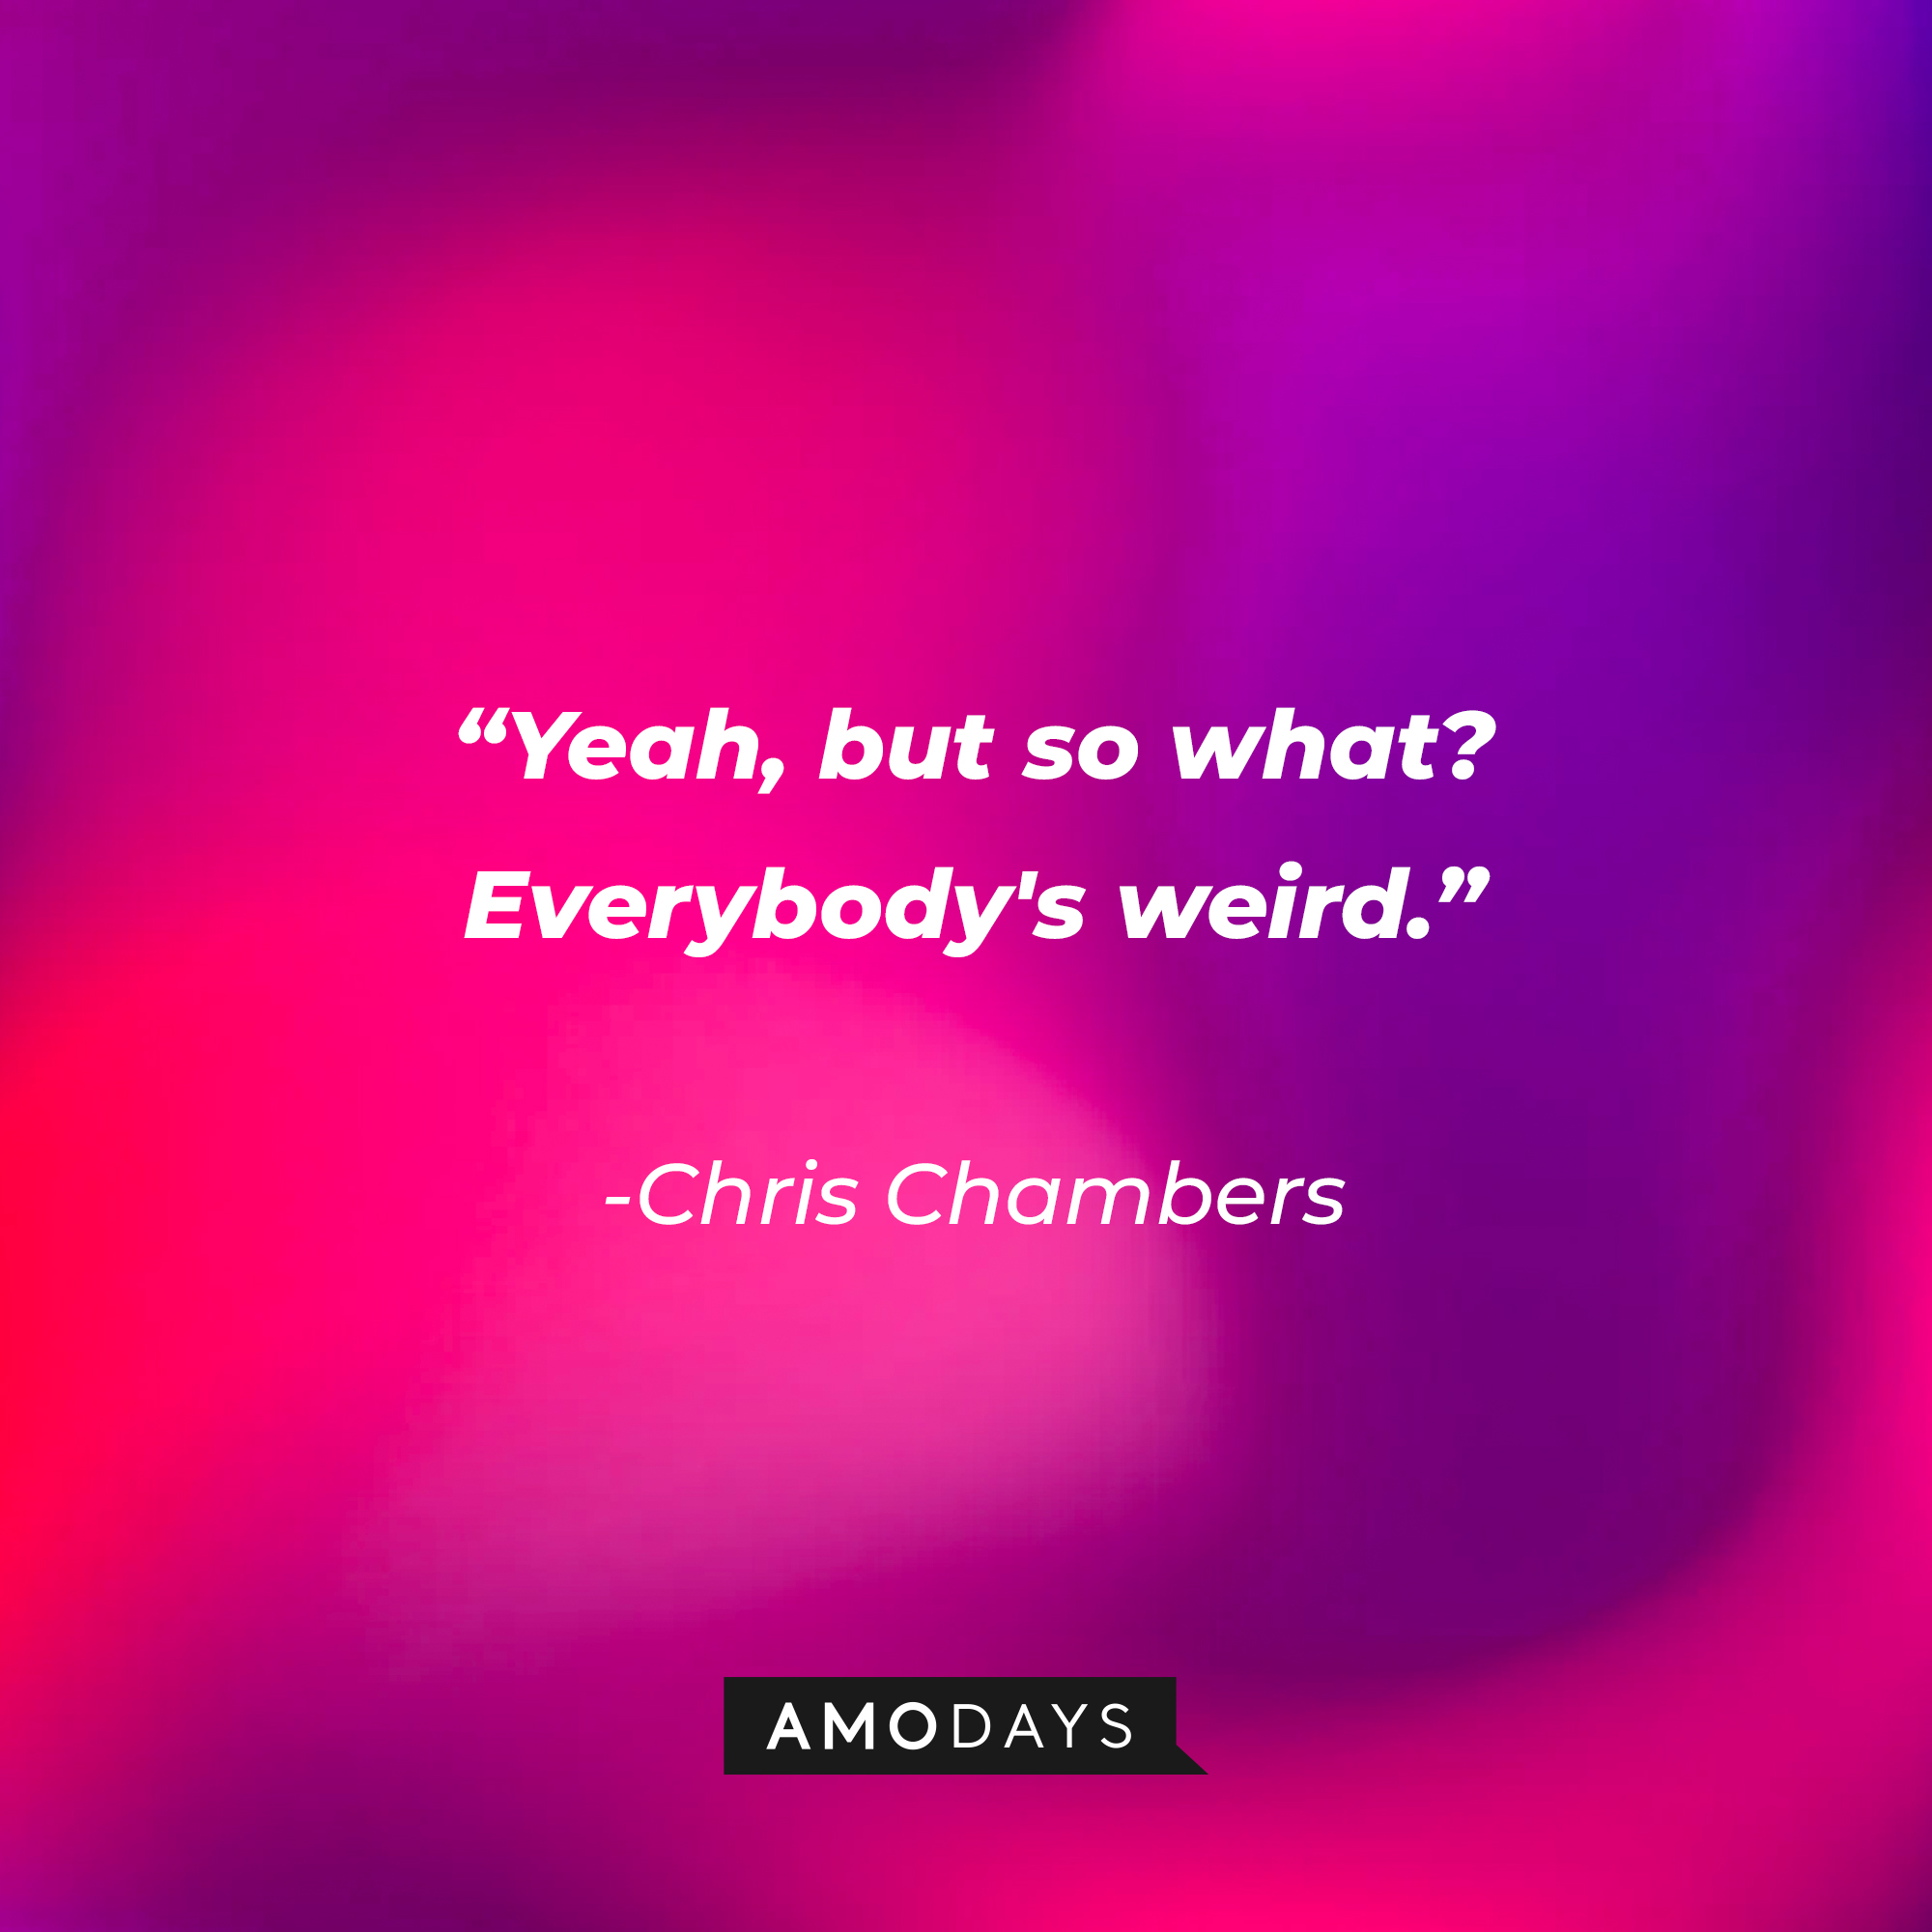 Chris Chambers’s quote:“Yeah, but so what? Everybody's weird.'" | Source: AmoDays